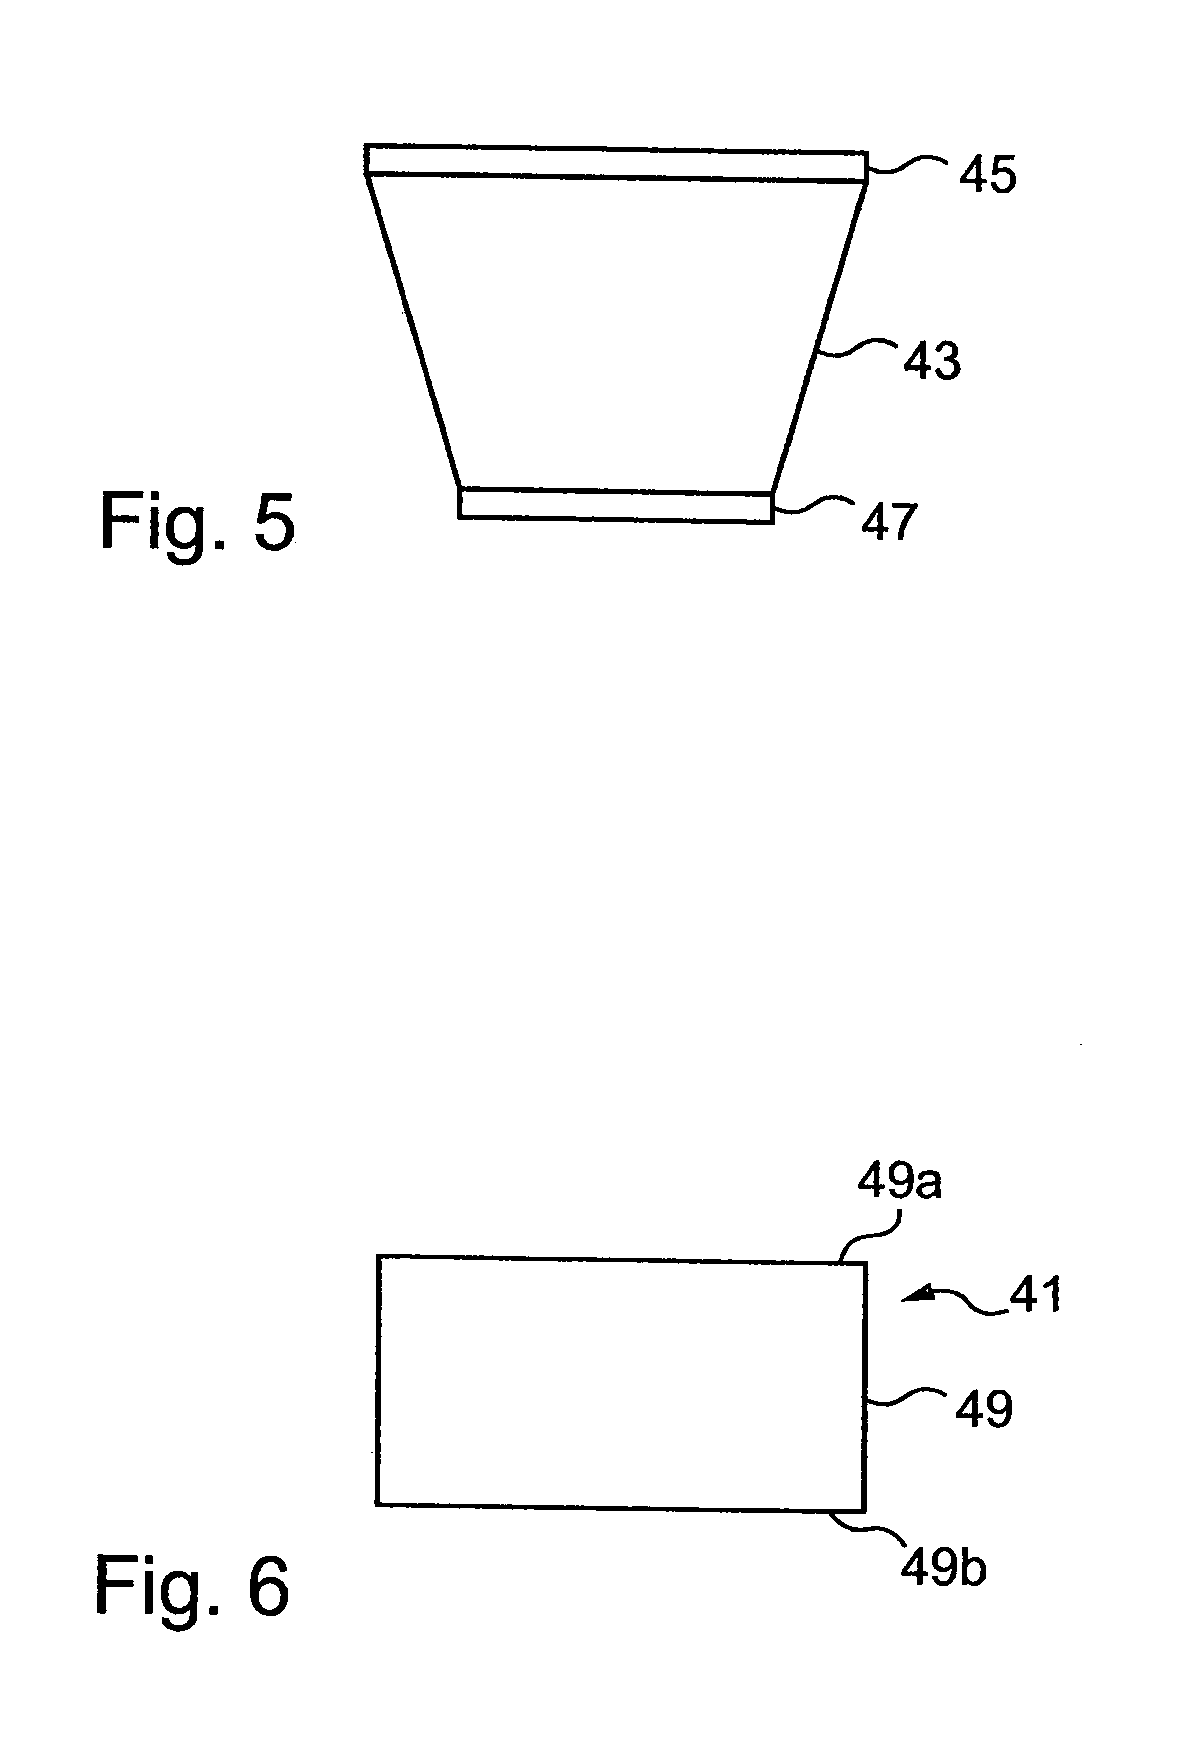 Photostimulable plate reading device